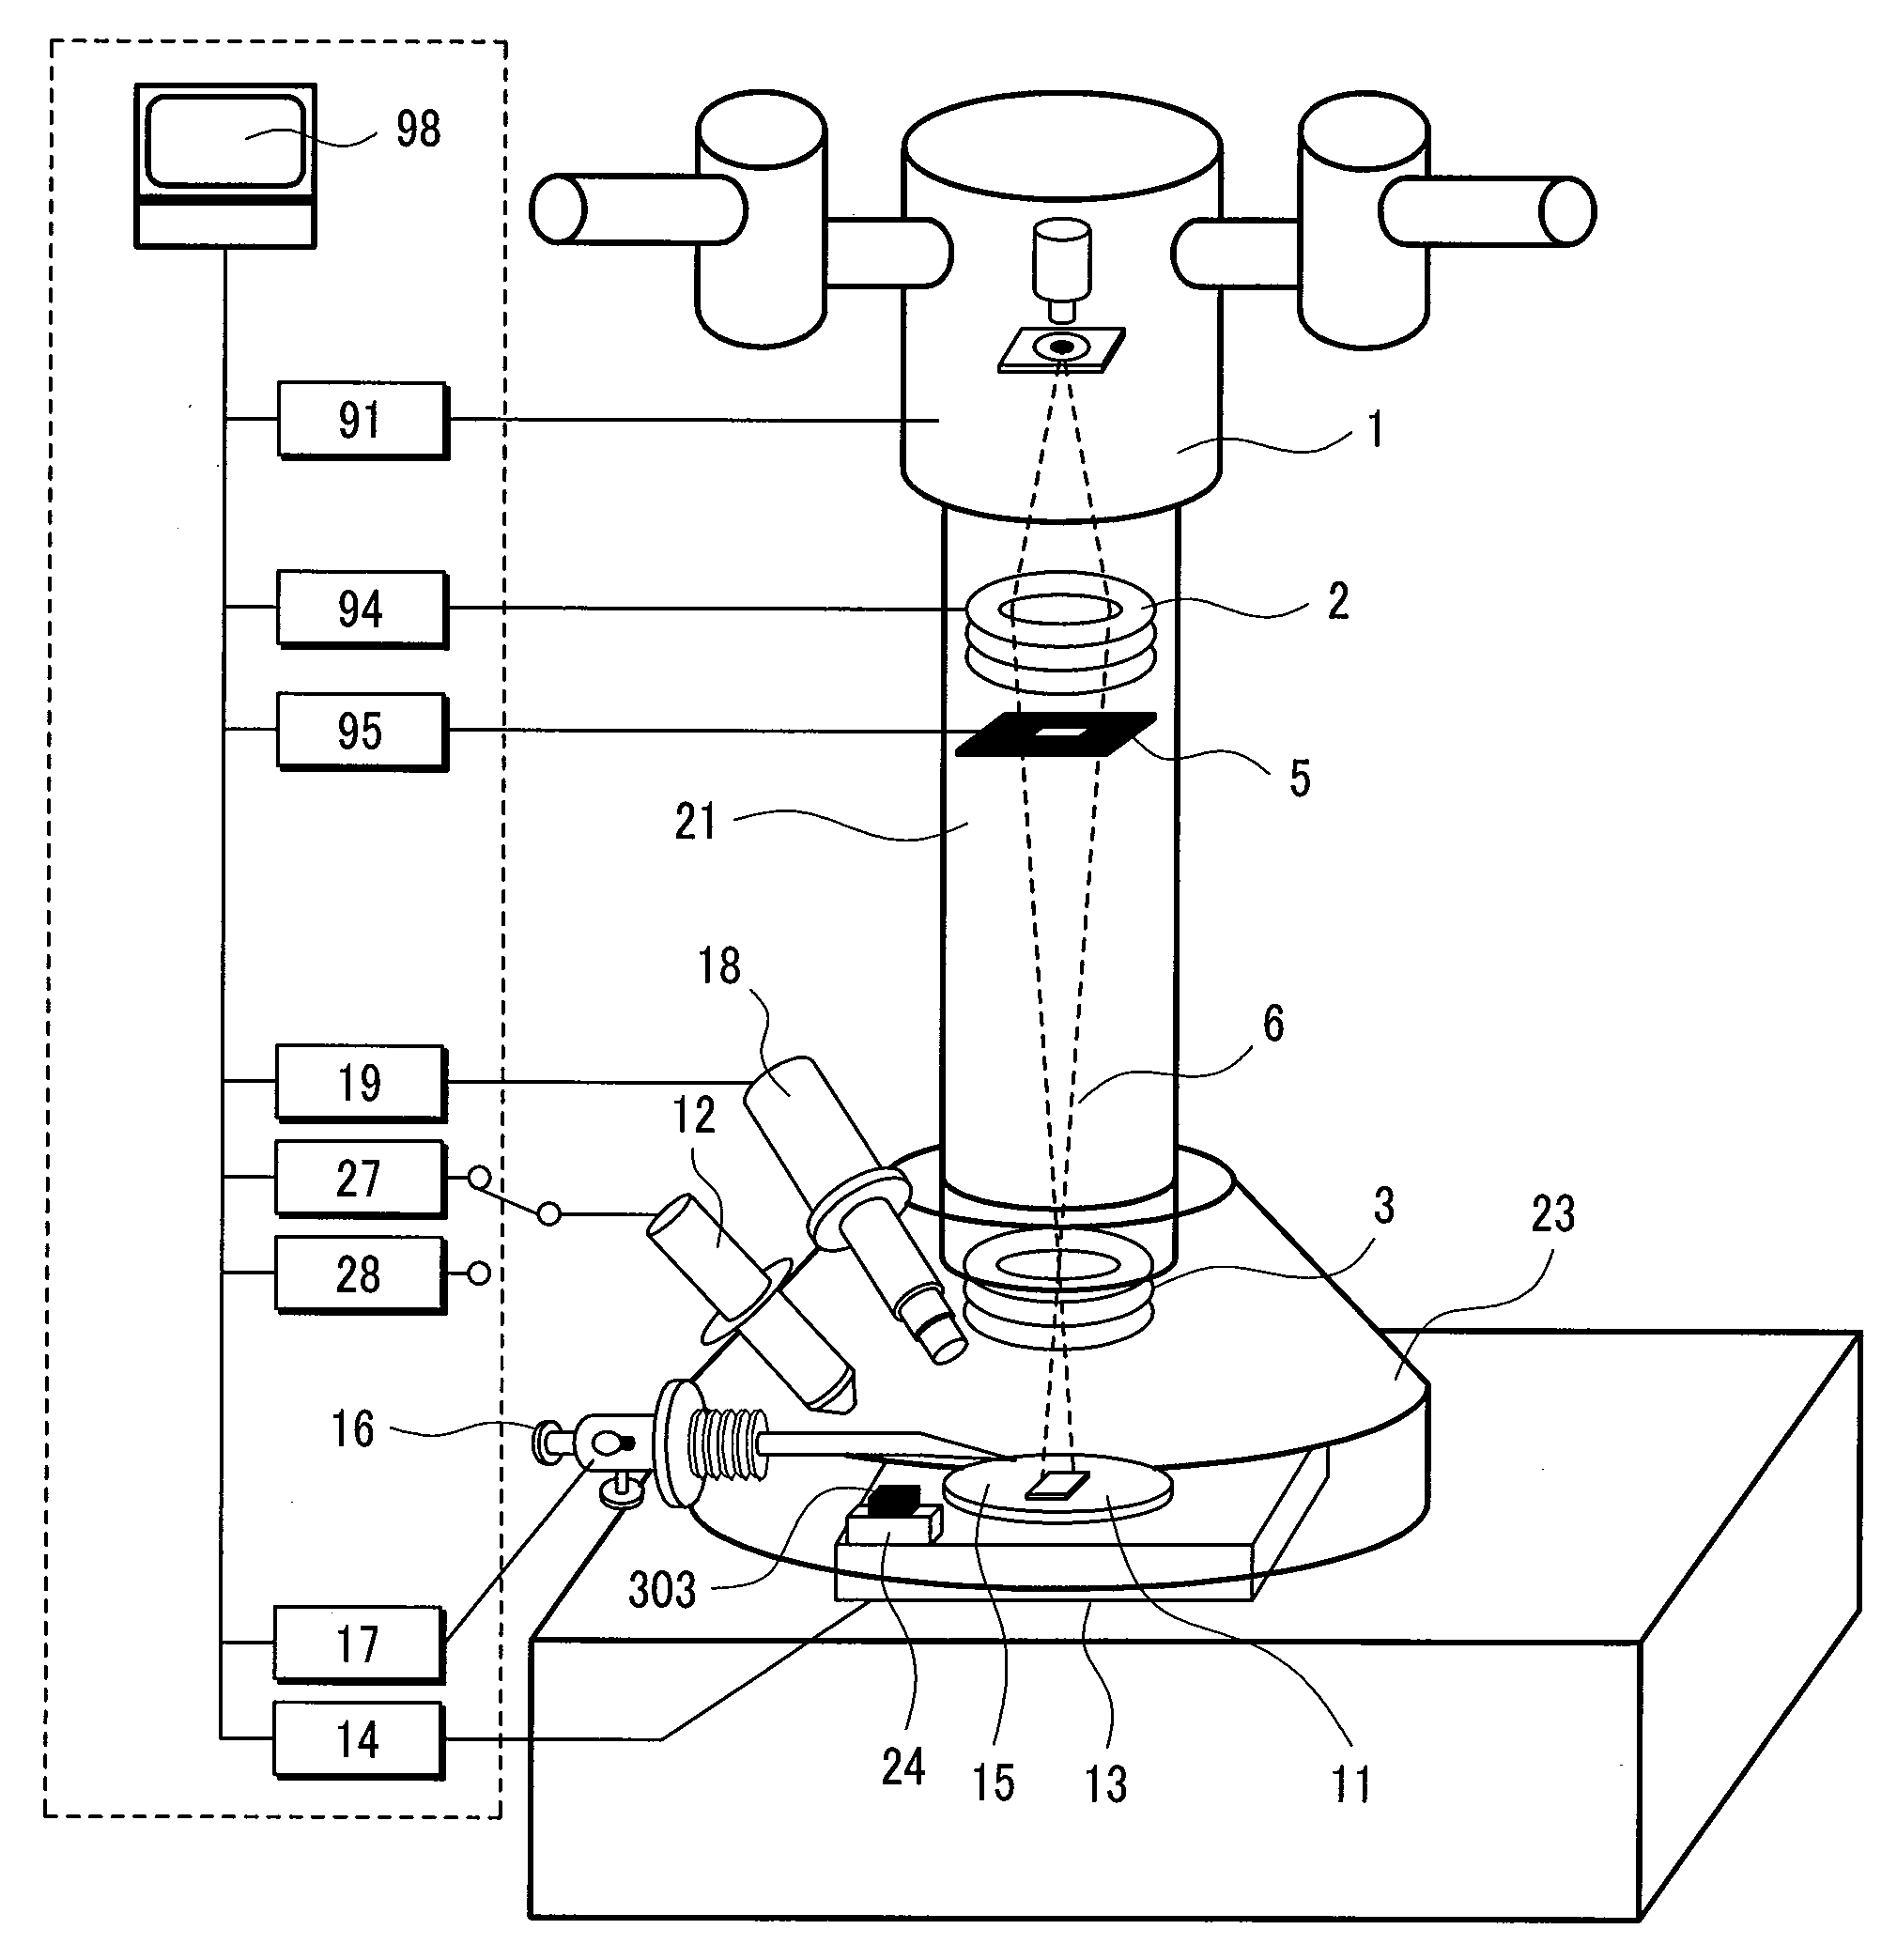 Ion source, ion beam processing/observation apparatus, charged particle beam apparatus, and method for observing cross section of sample